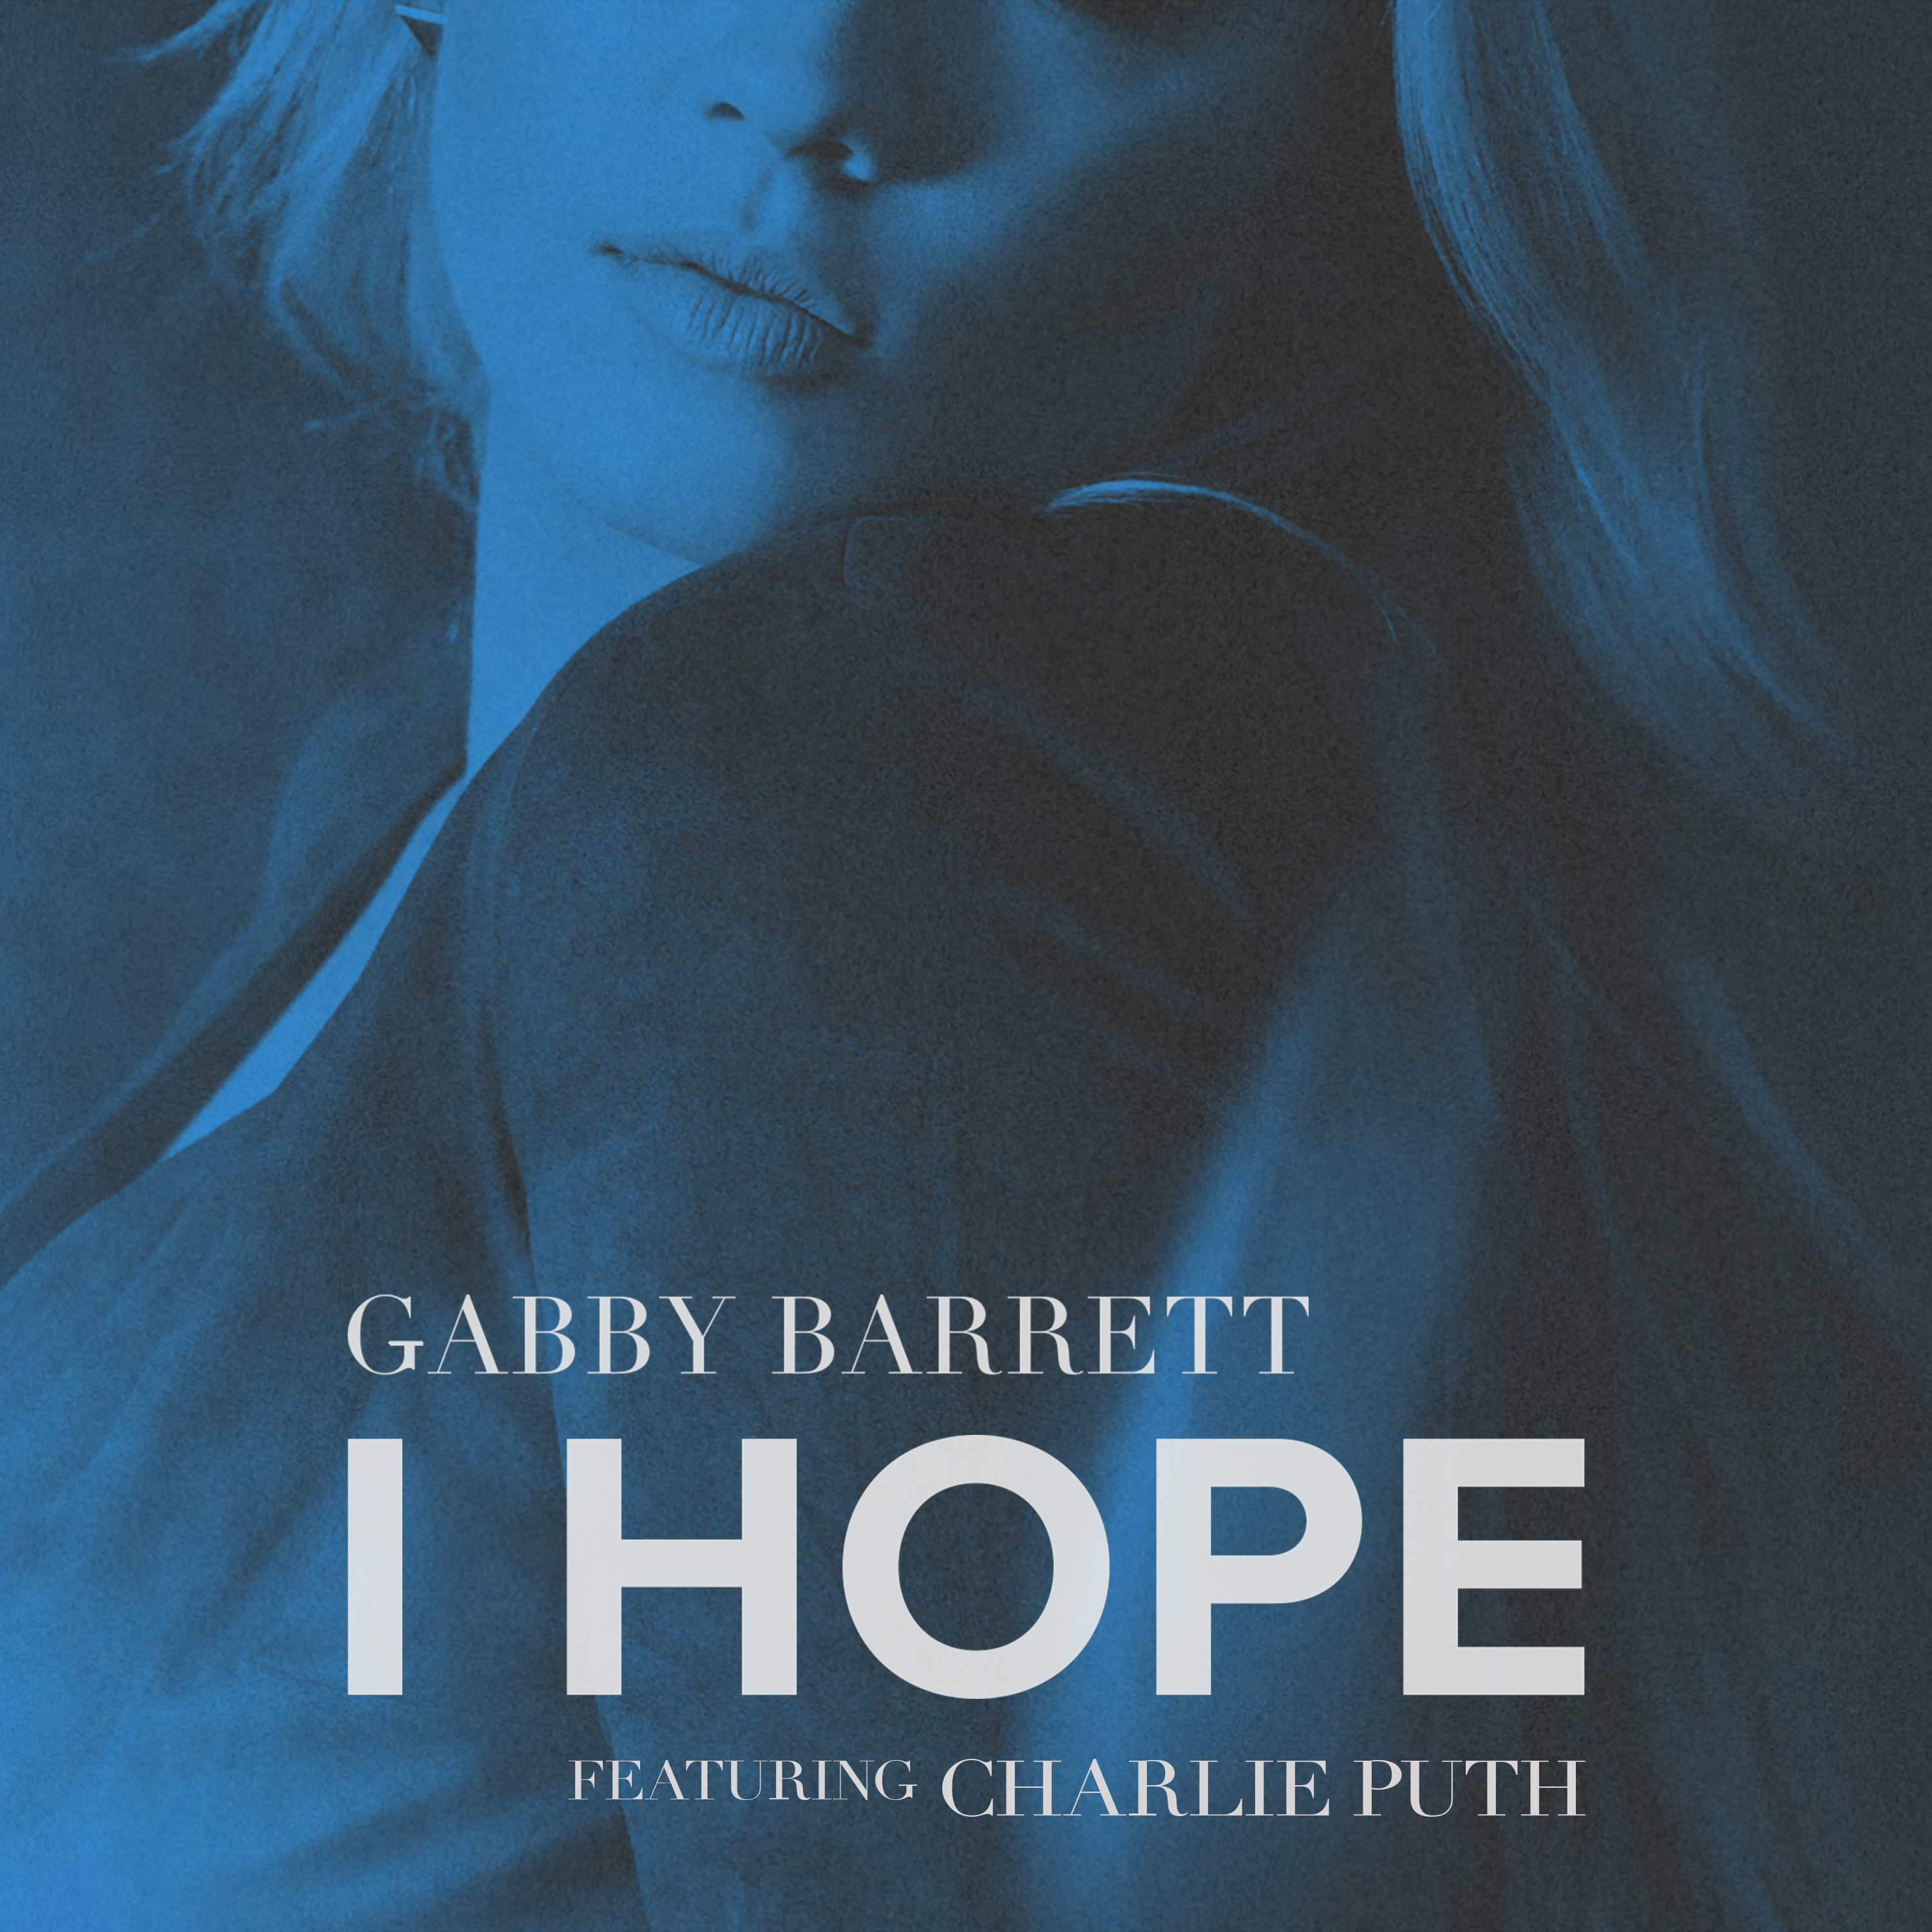 (NEW COLLAB) GABBY BARRETT AND CHARLIE PUTH JOIN ON "I HOPE"